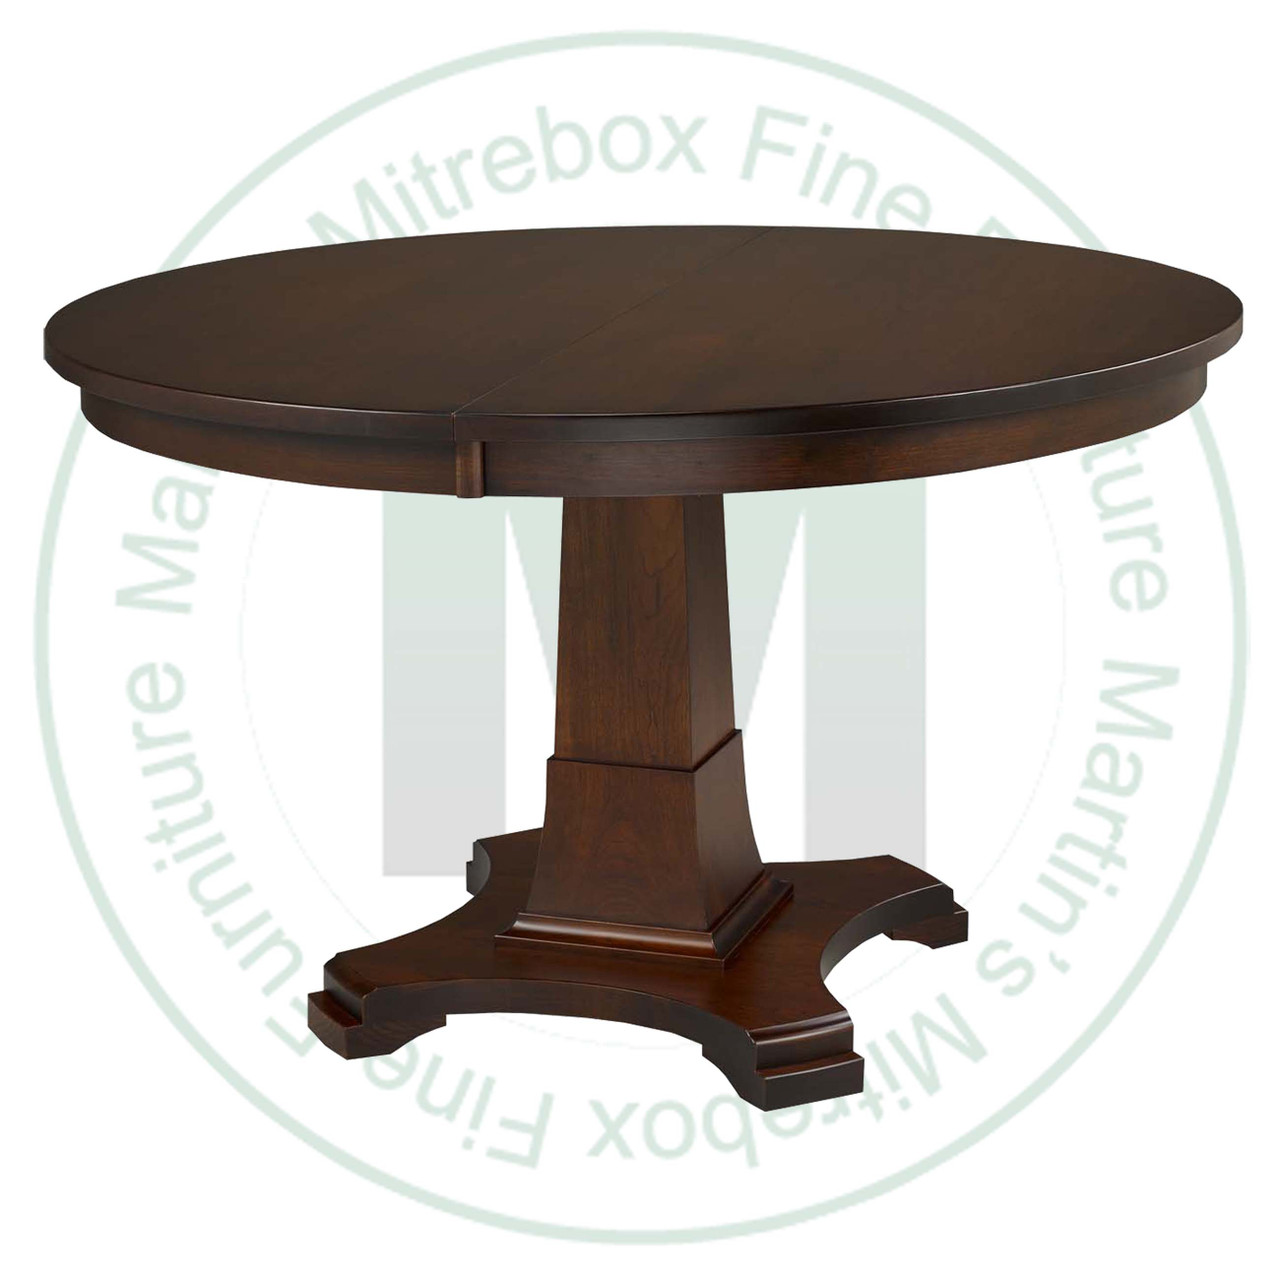 Oak Abbey Single Pedestal Table 48''D x 48''W x 30''H With 2 - 12'' Leaves. Table Has 1'' Thick Top